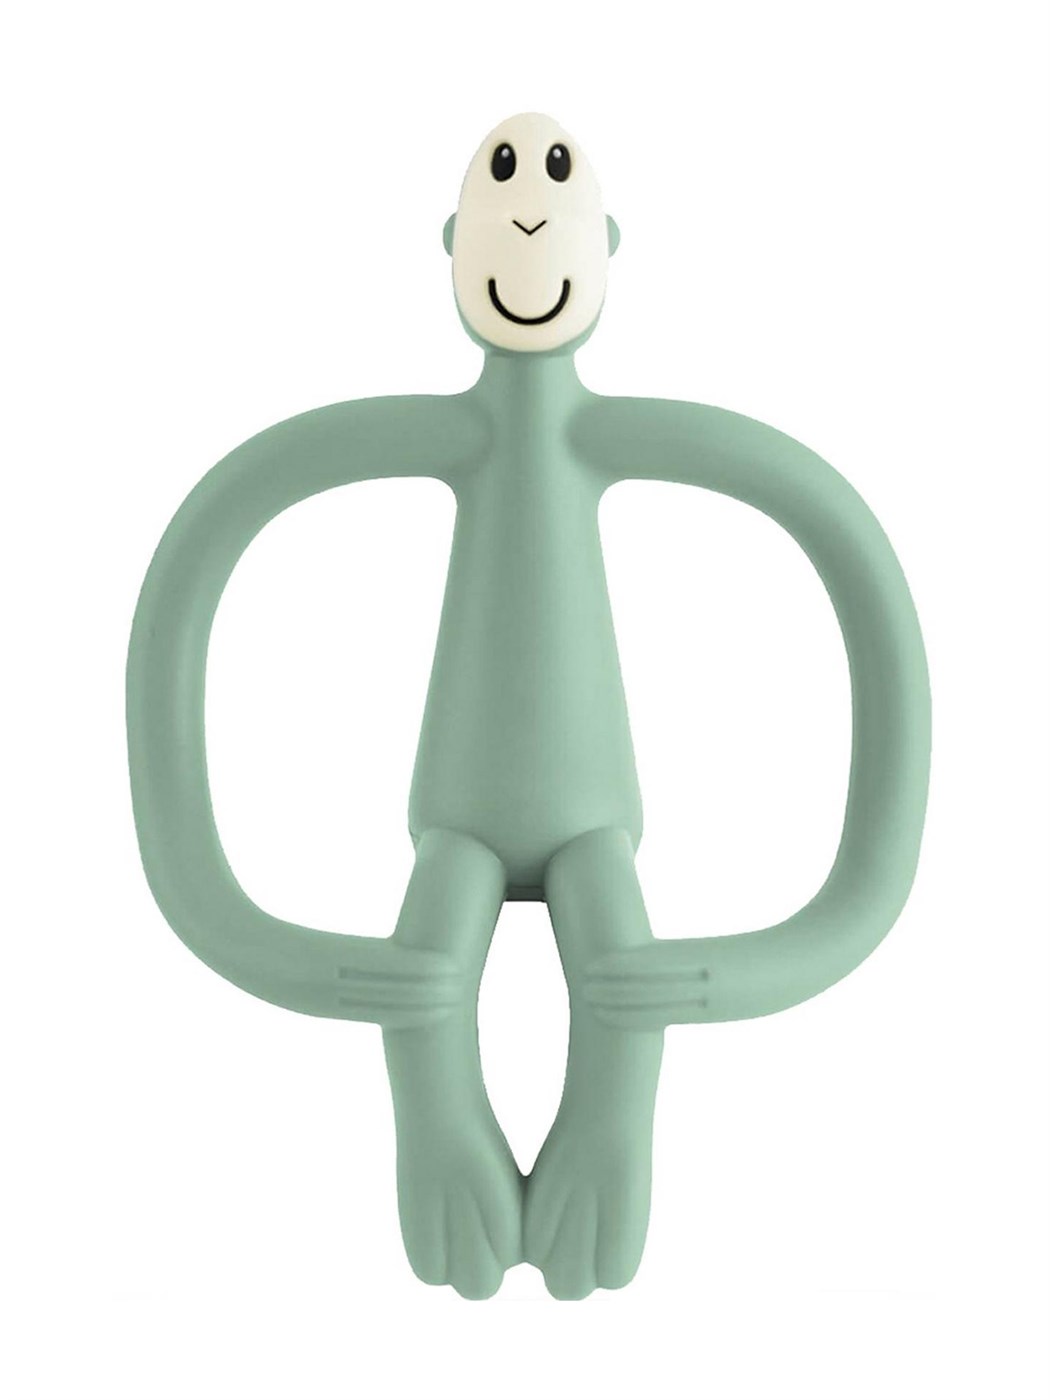 Product image for Matchstick Monkey Teething Toy - MINT GREEN